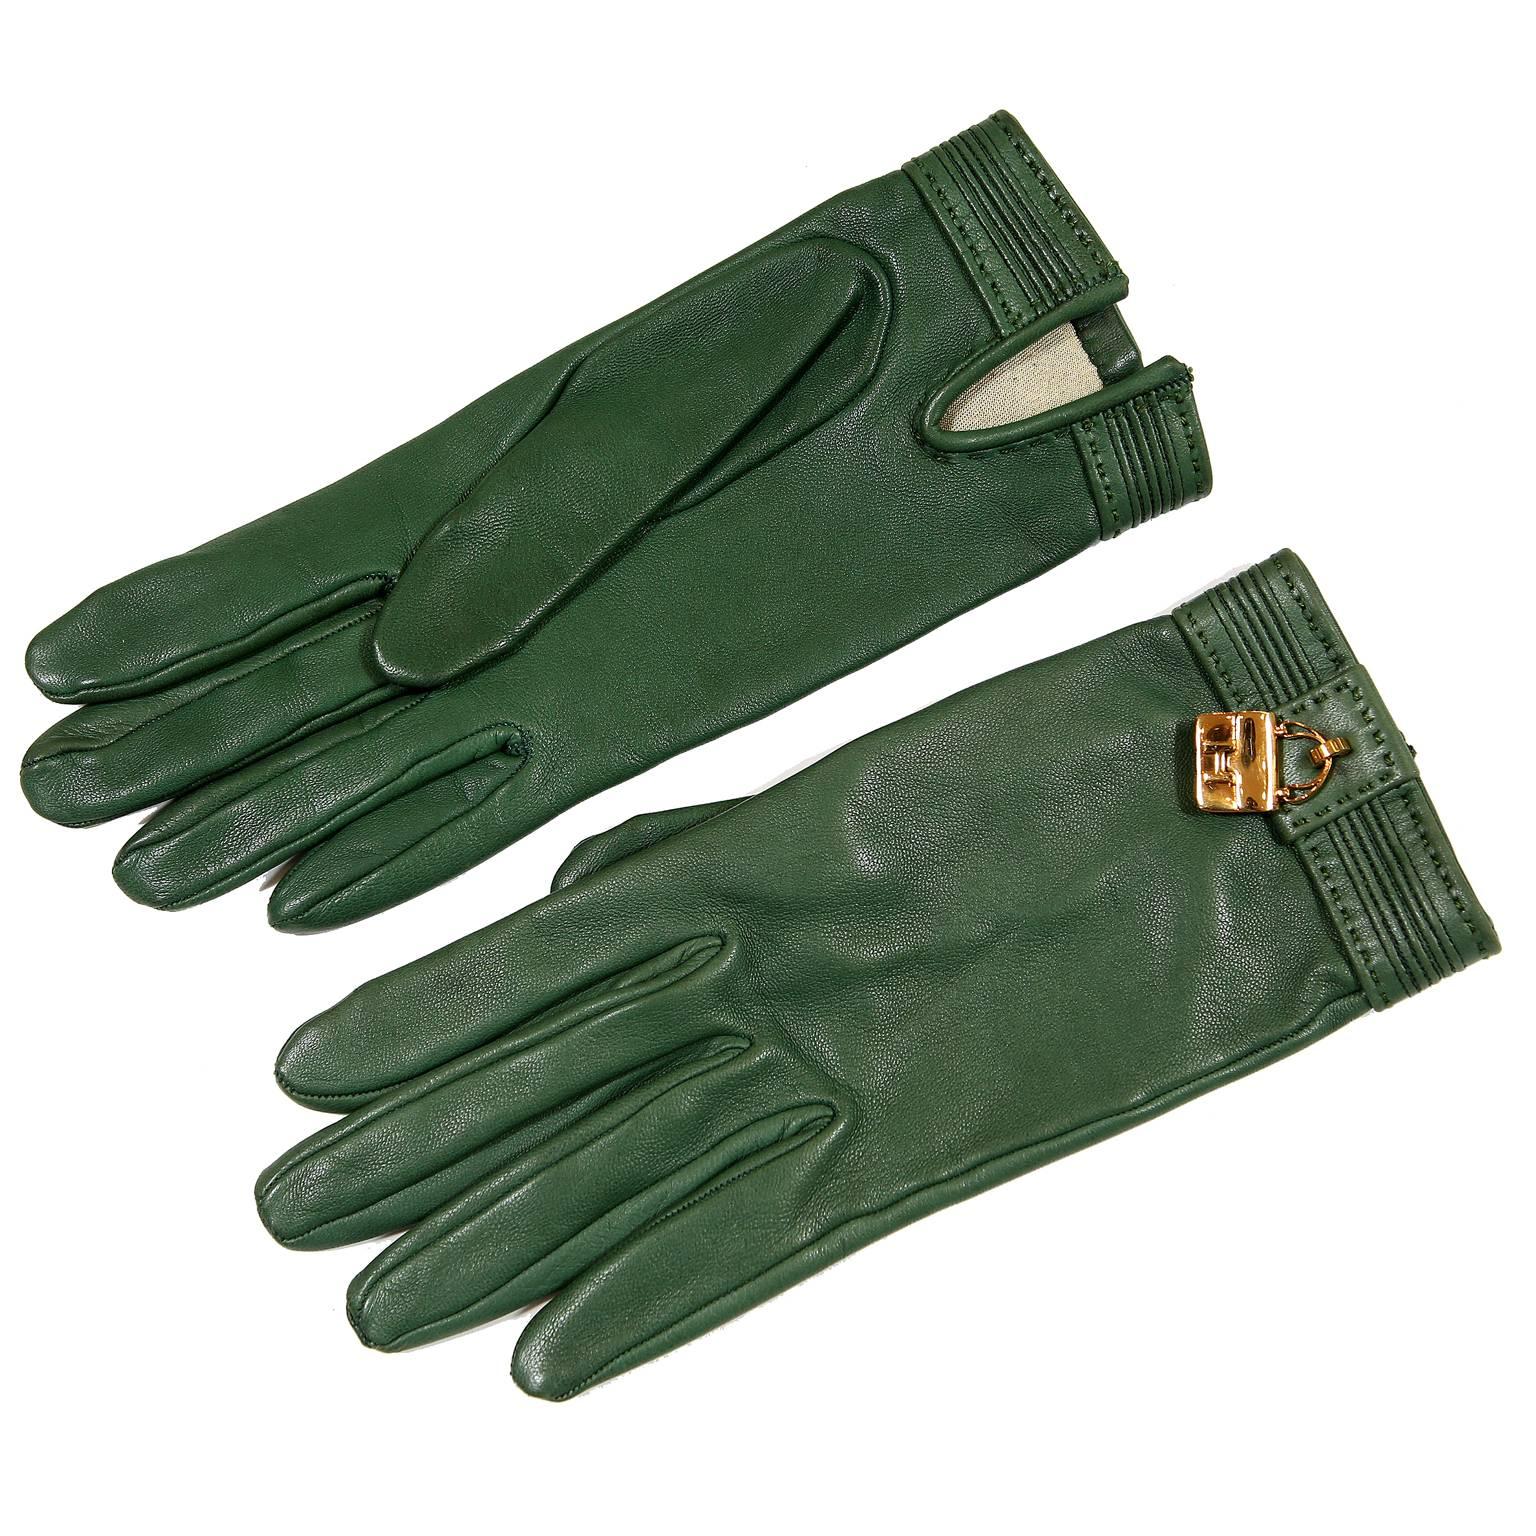 Hermès Green Leather Gloves- MINT condition
Women’s size 6.5.  Dark green lined leather gloves have gold tone Hermès bag charms.  The right glove sports a Birkin and the left, a Constance.  Chic and collectible.  
